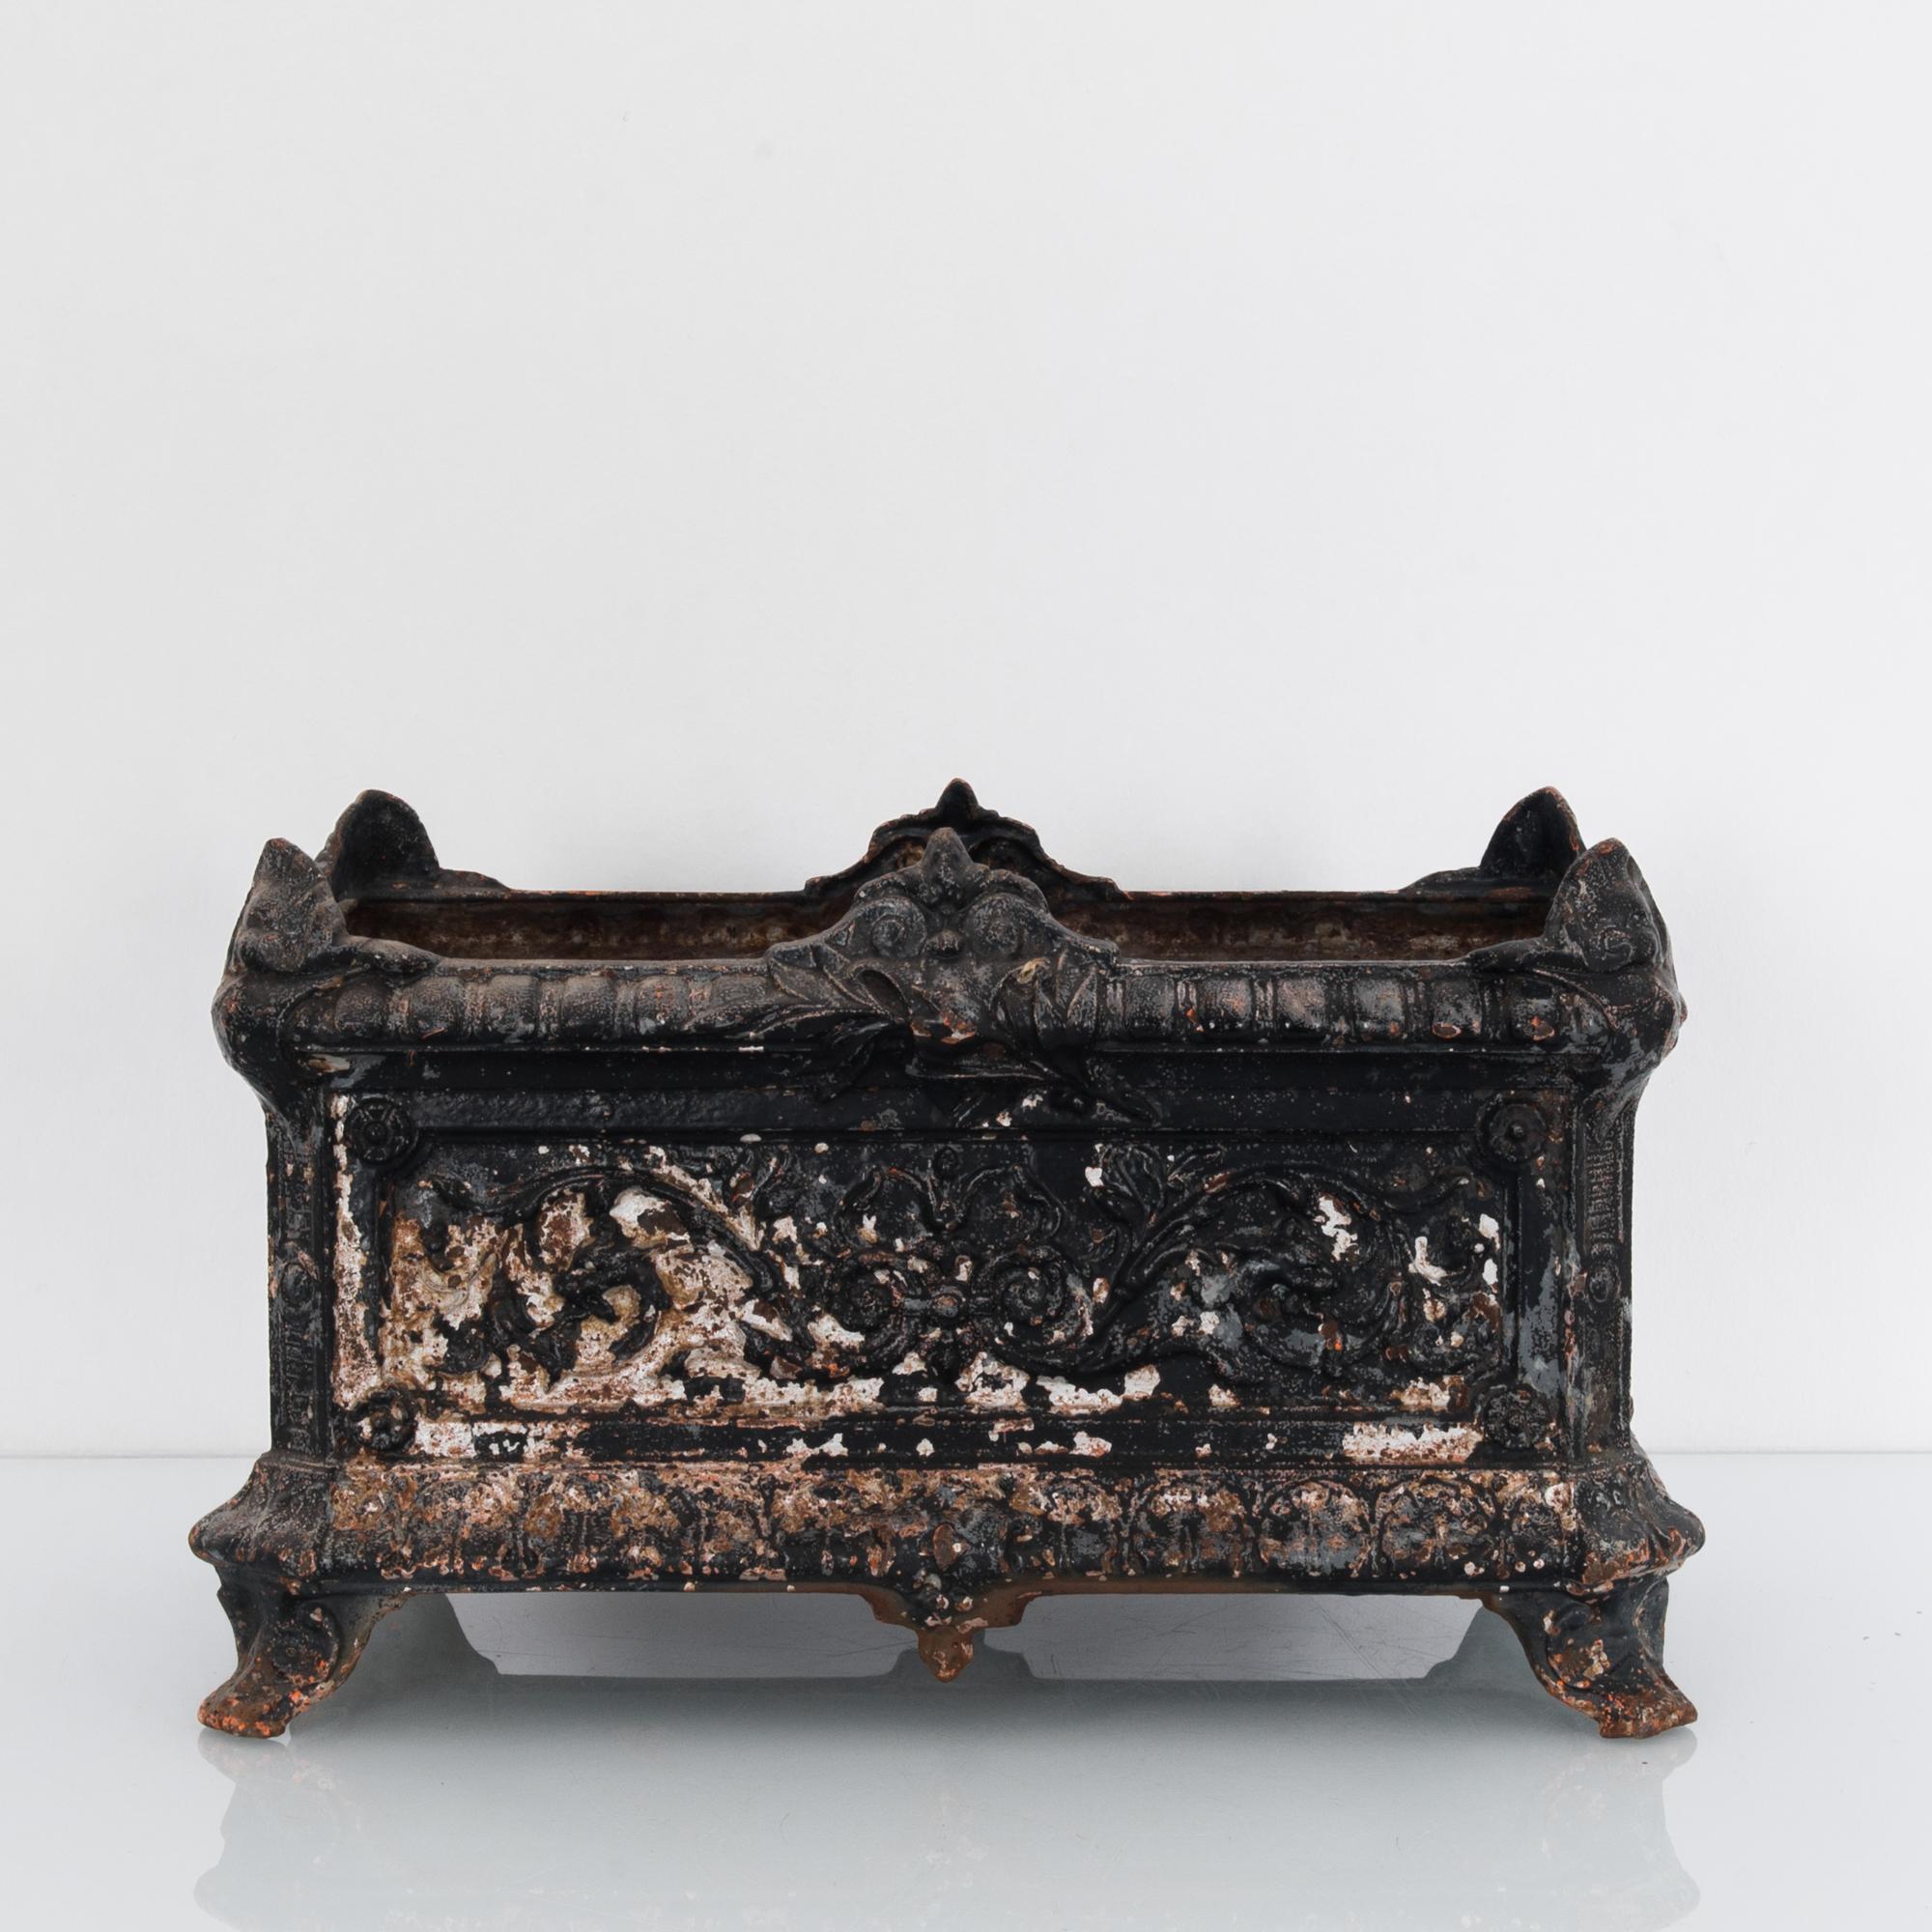 This vintage cast iron planter from 1950s France, features a rectangular shape with decorative accents. The elaborate floral patterns and unique patina of aging black paint produces a muted gothic effect. The sophistication of age gives this vintage